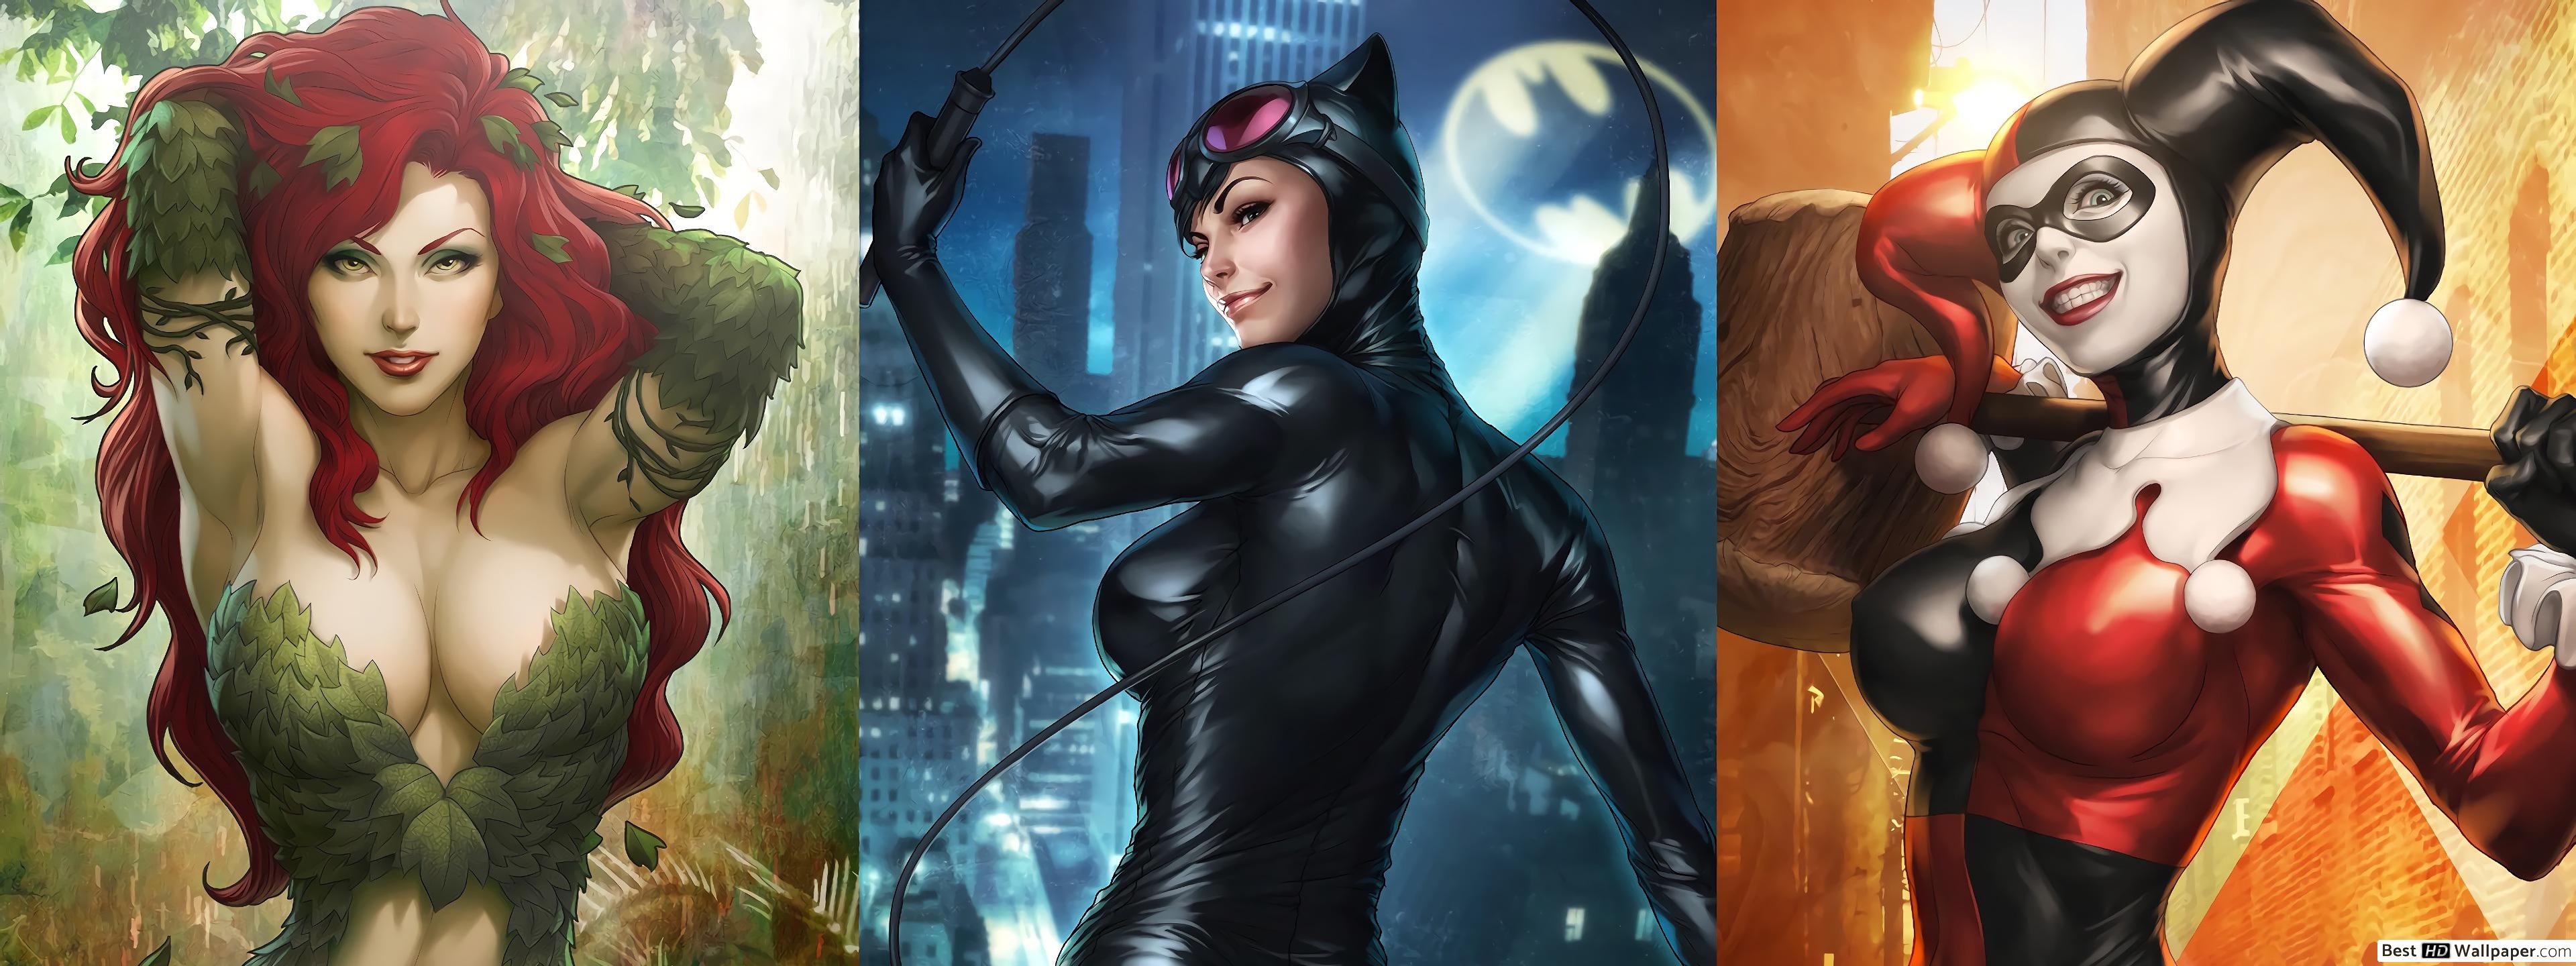 Poison Ivy, Cat Woman & Harley Quinn HD wallpaper download